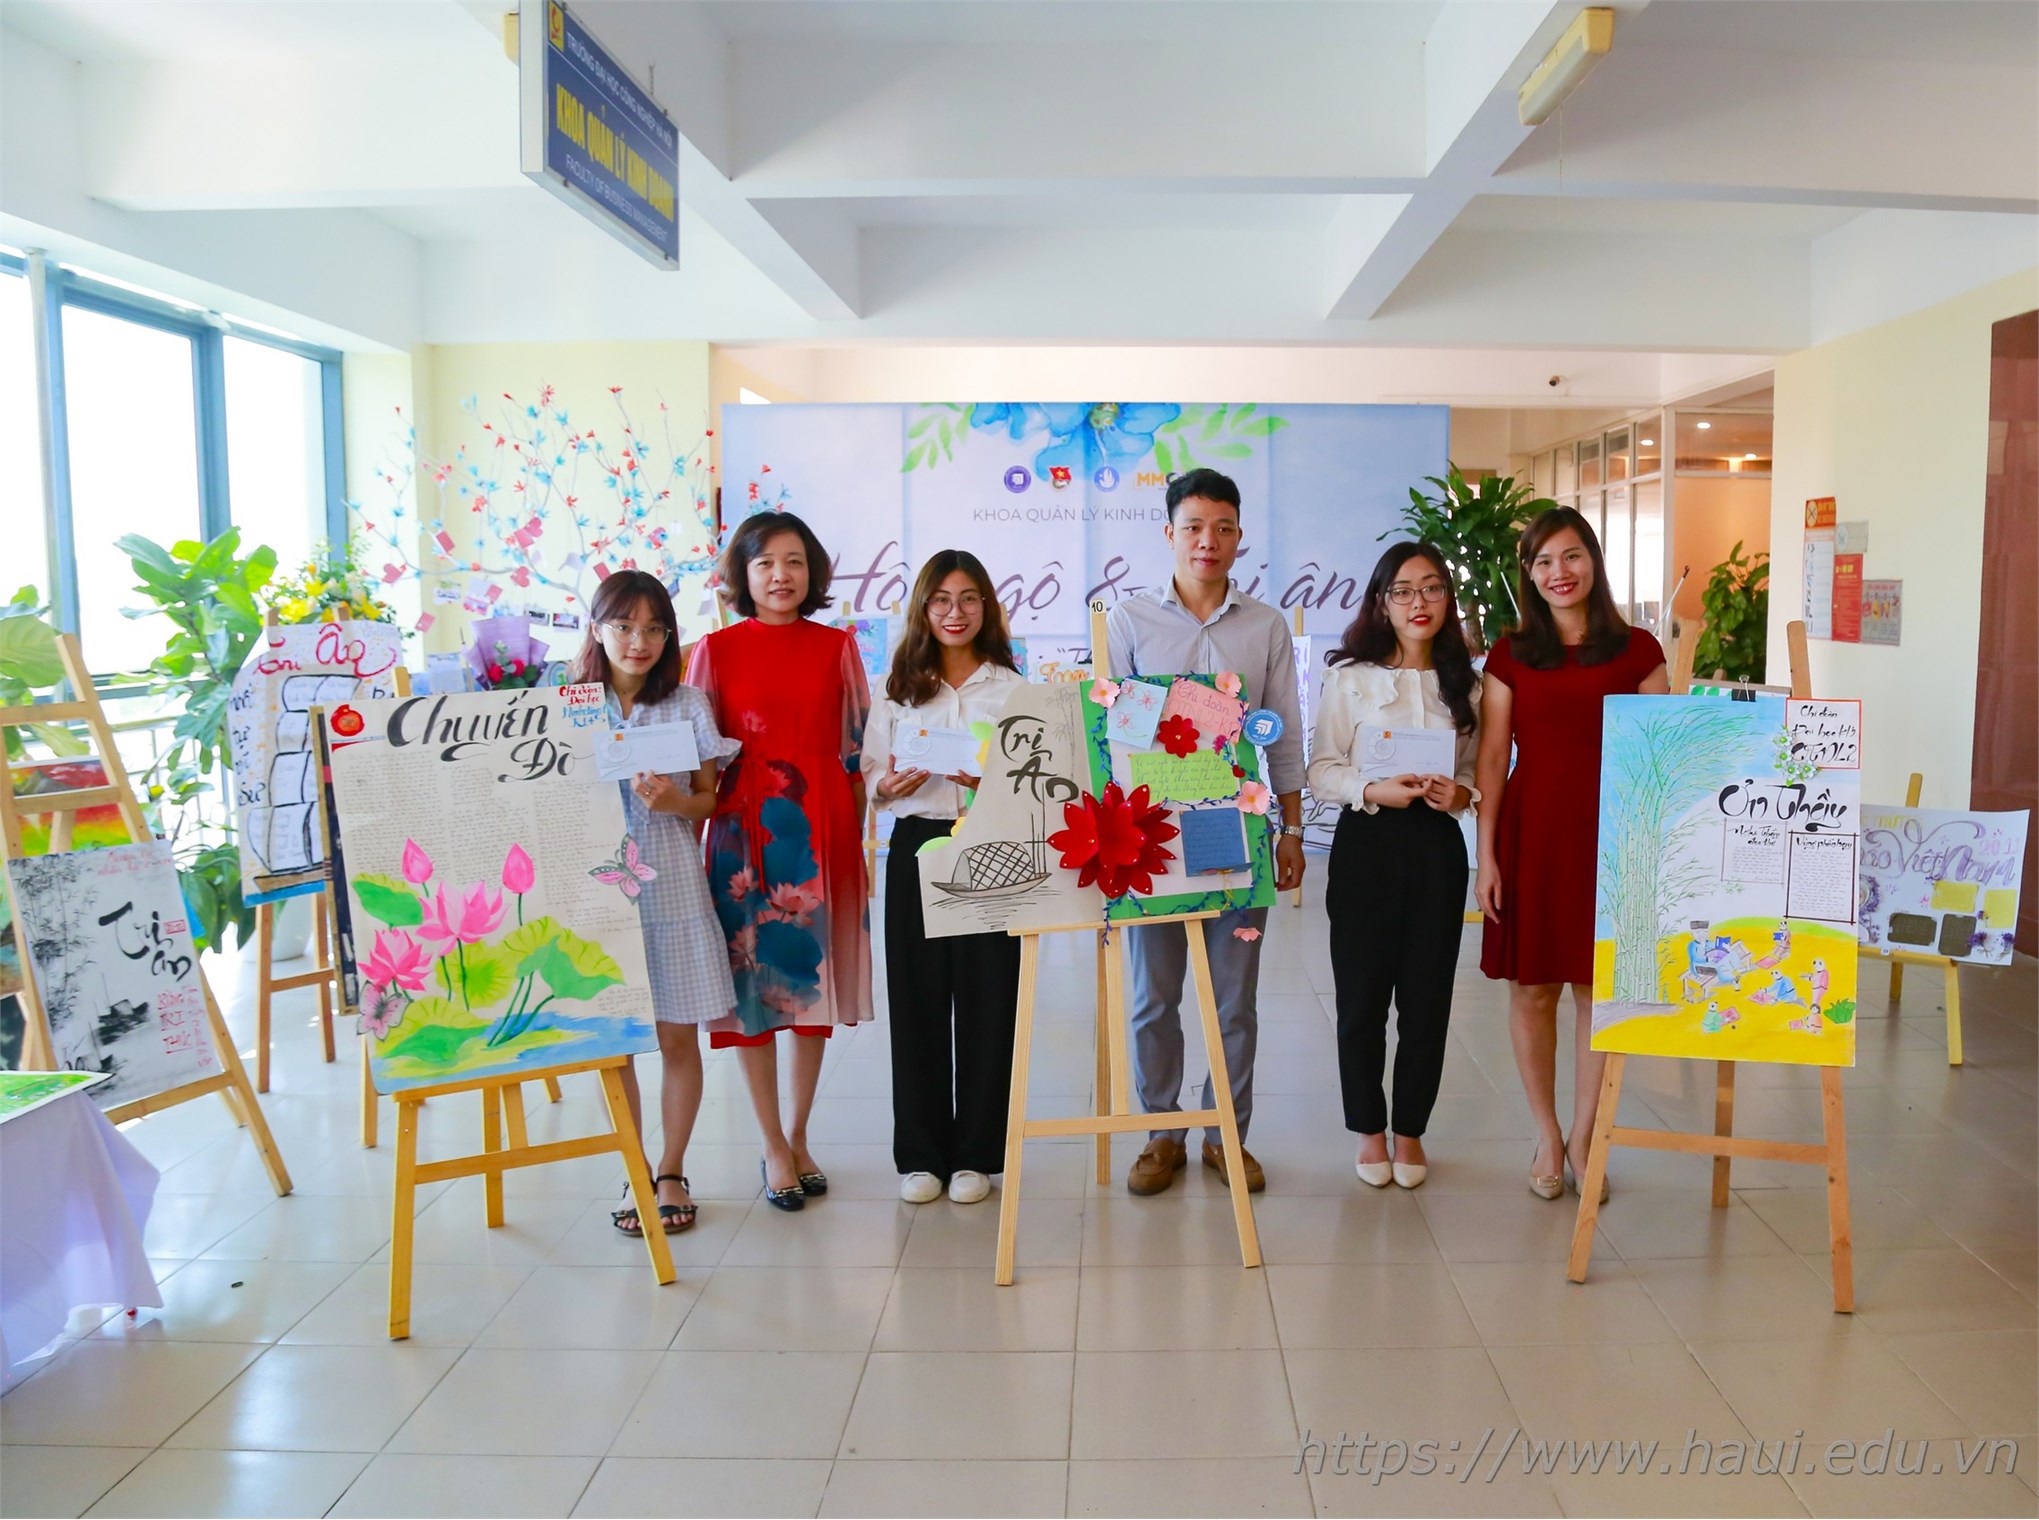 `Greeting Card Designing` contest to celebrate Vietnamese Teachers' Day